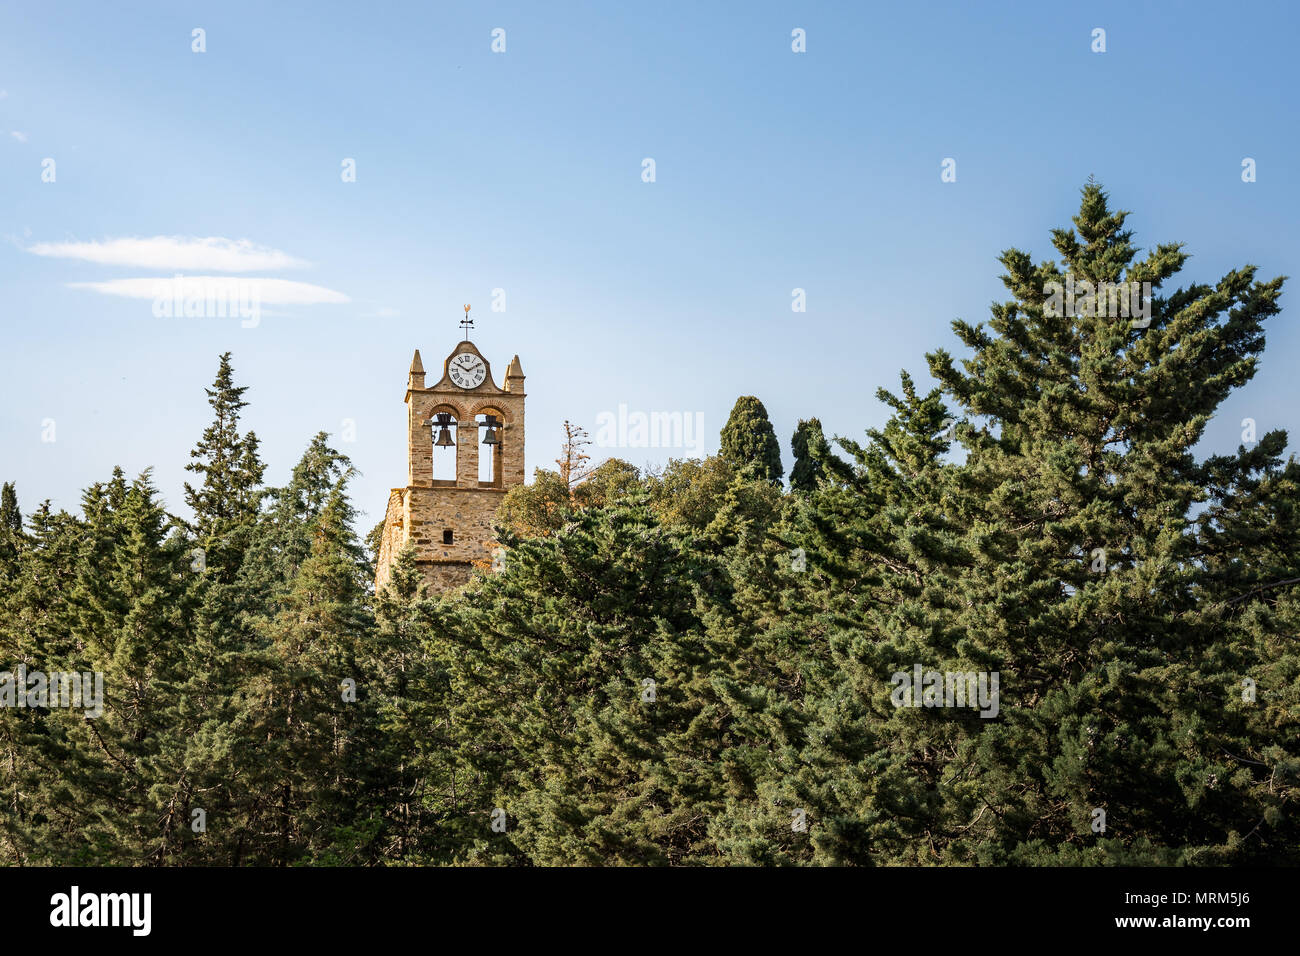 Church tower rising above a forest of pines Stock Photo